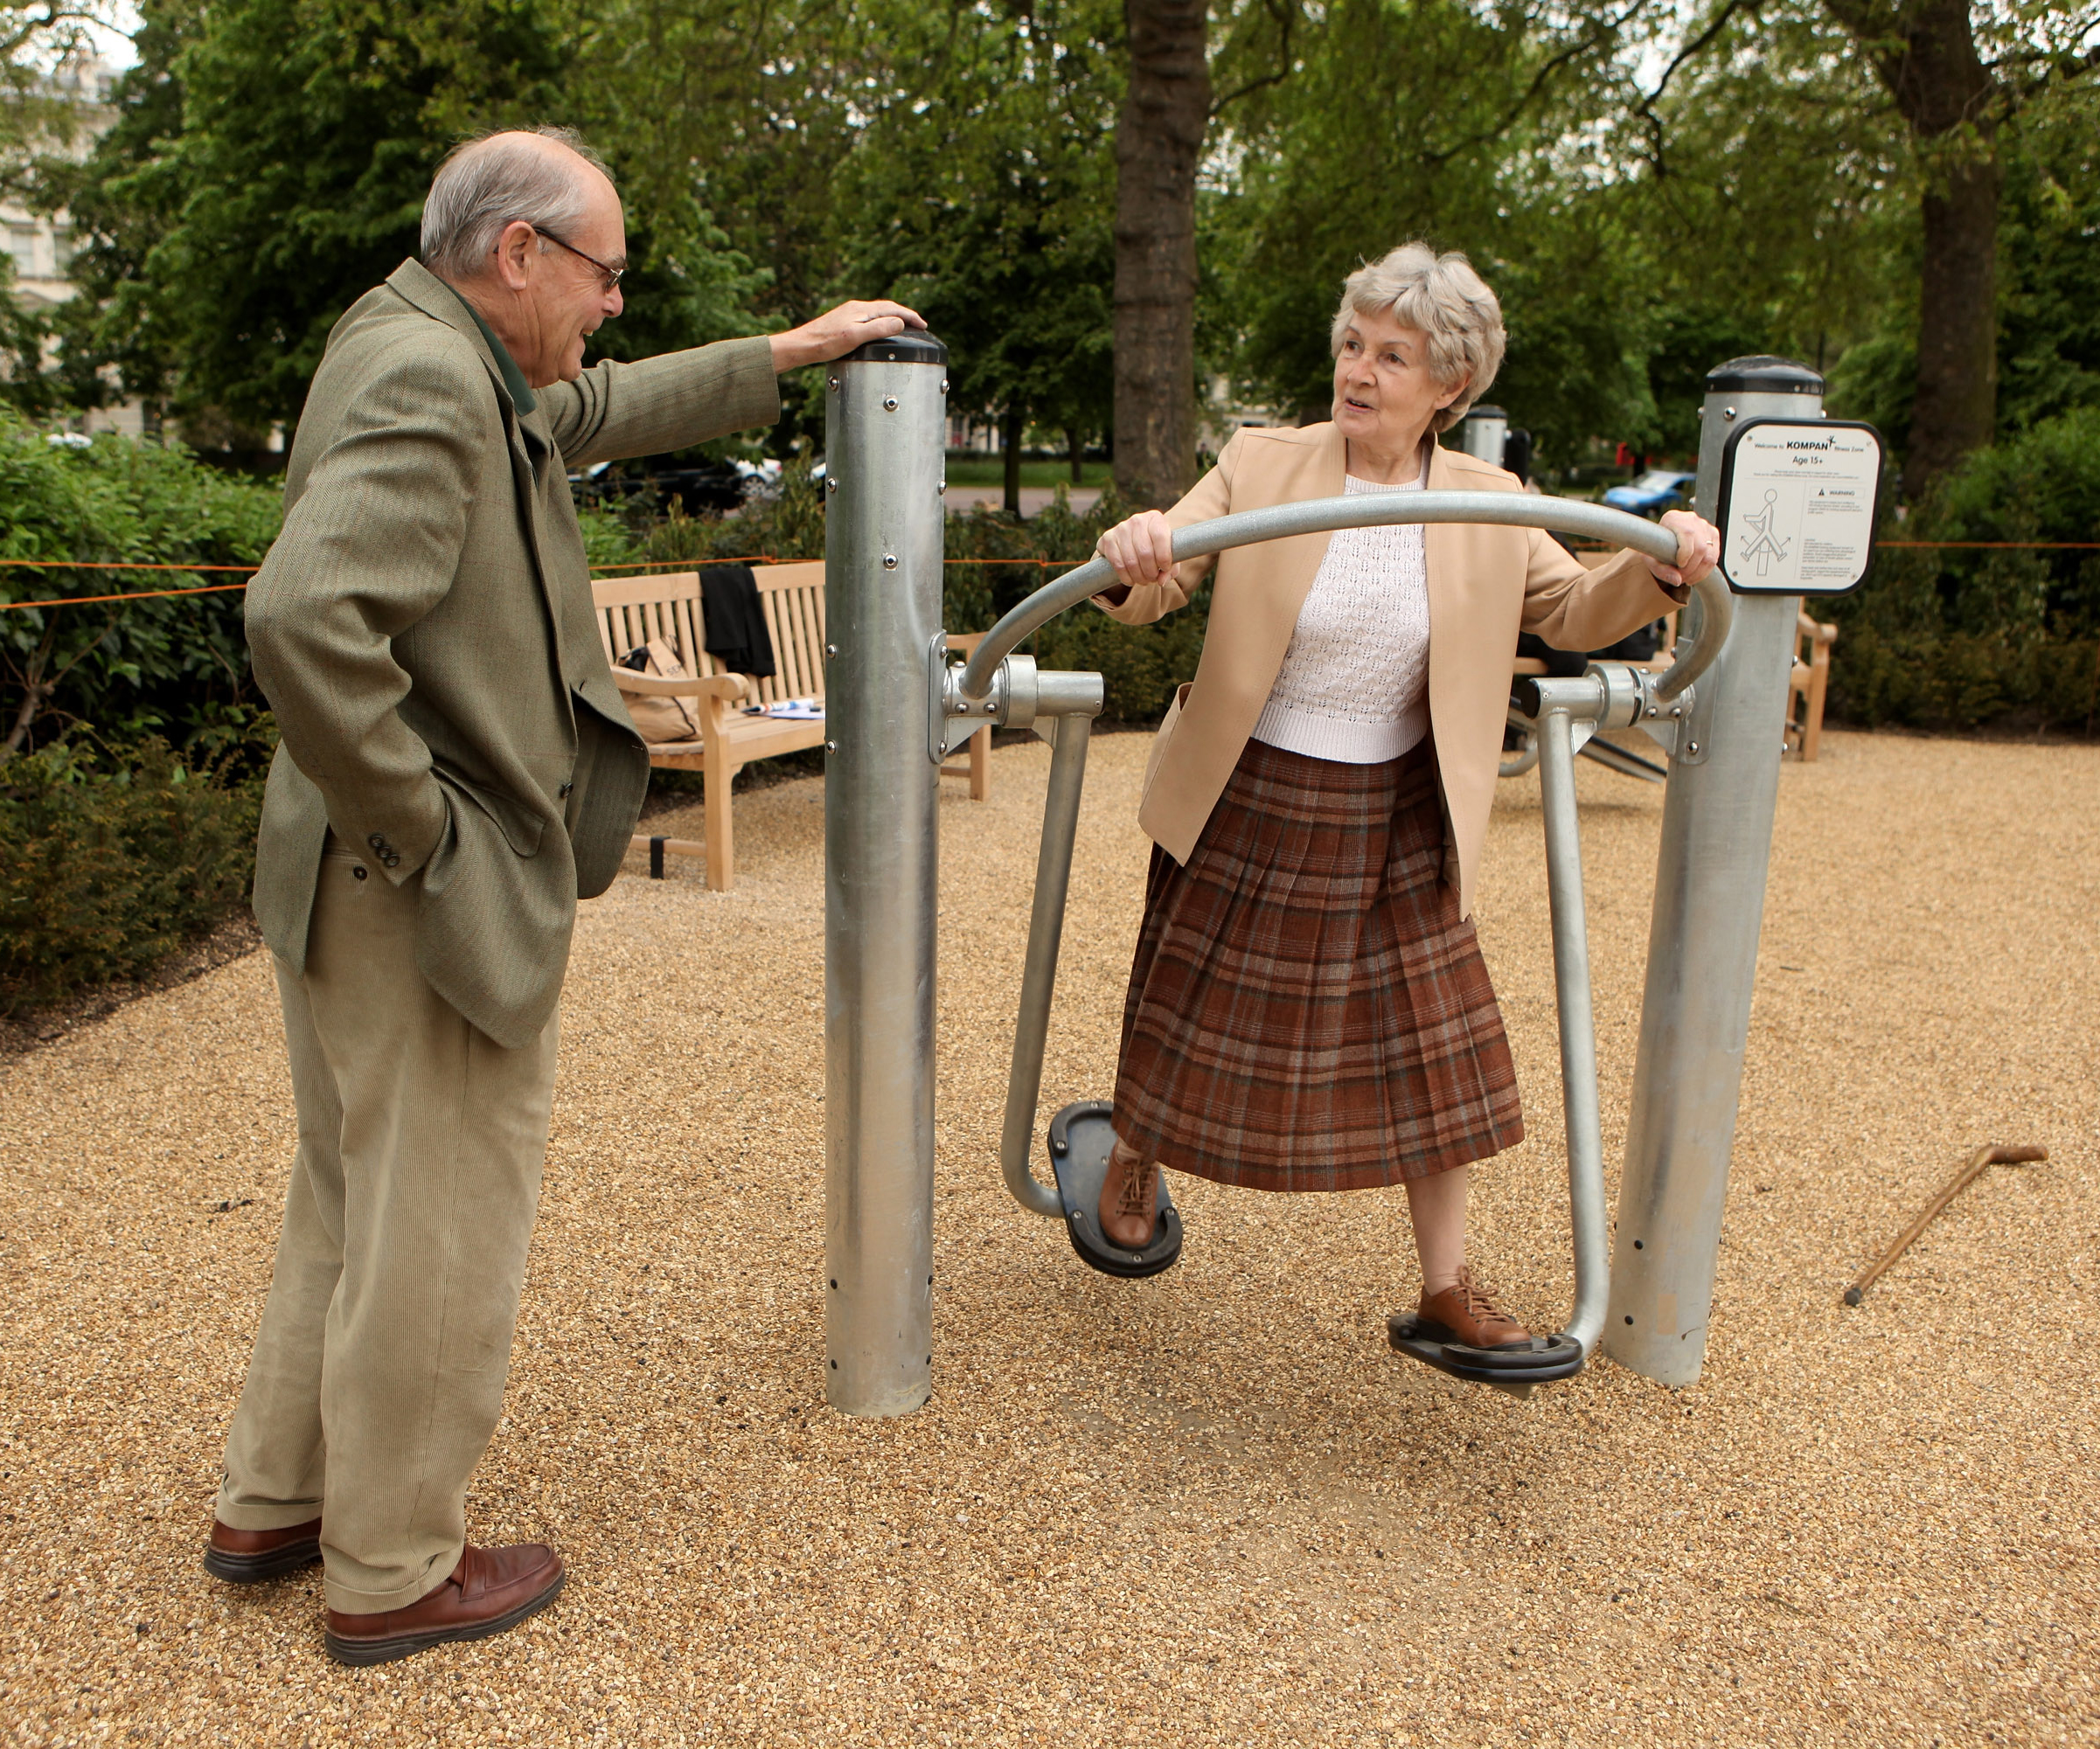 Now there’s playgrounds for grandparents